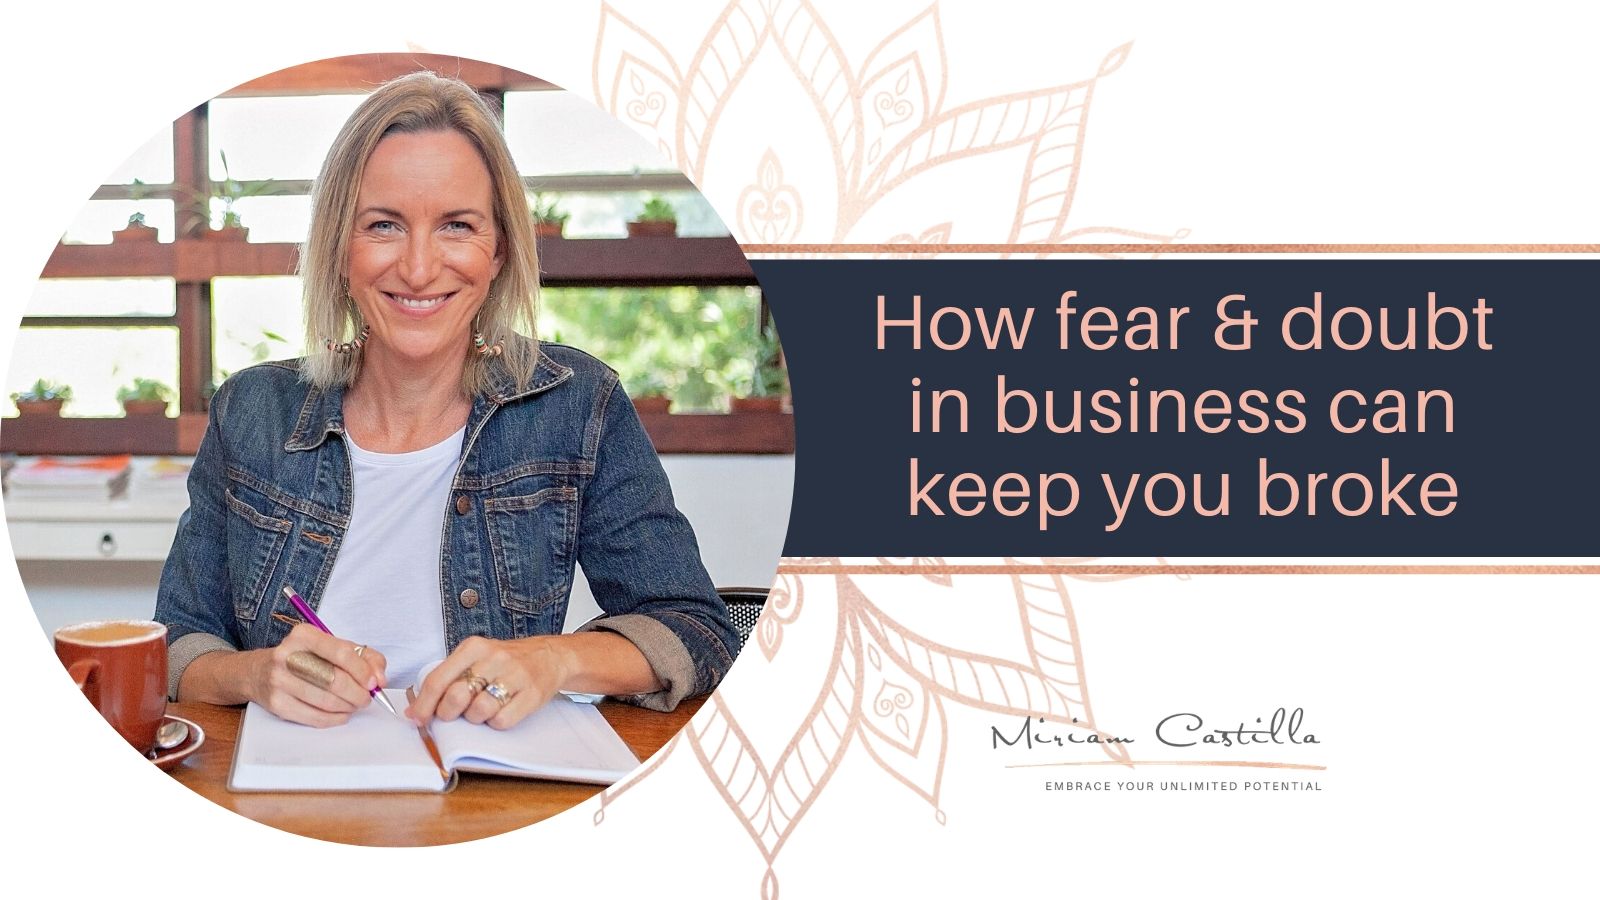 How fear & doubt in business can keep you broke - Miriam Castilla ...